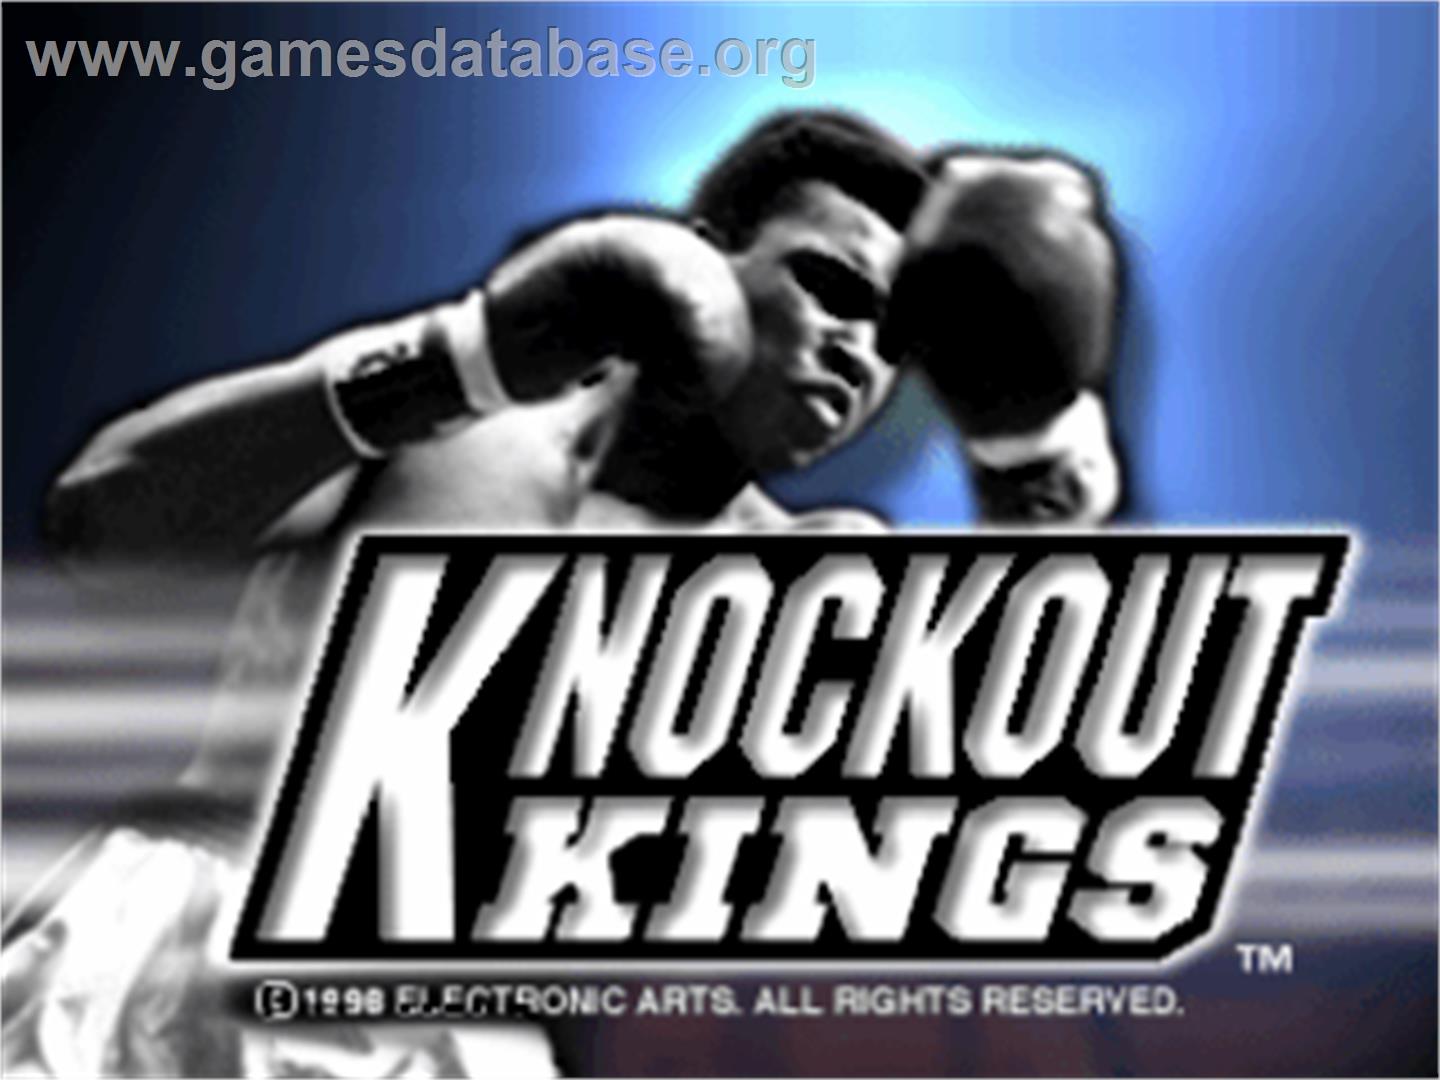 Knockout Kings - Sony Playstation - Artwork - Title Screen